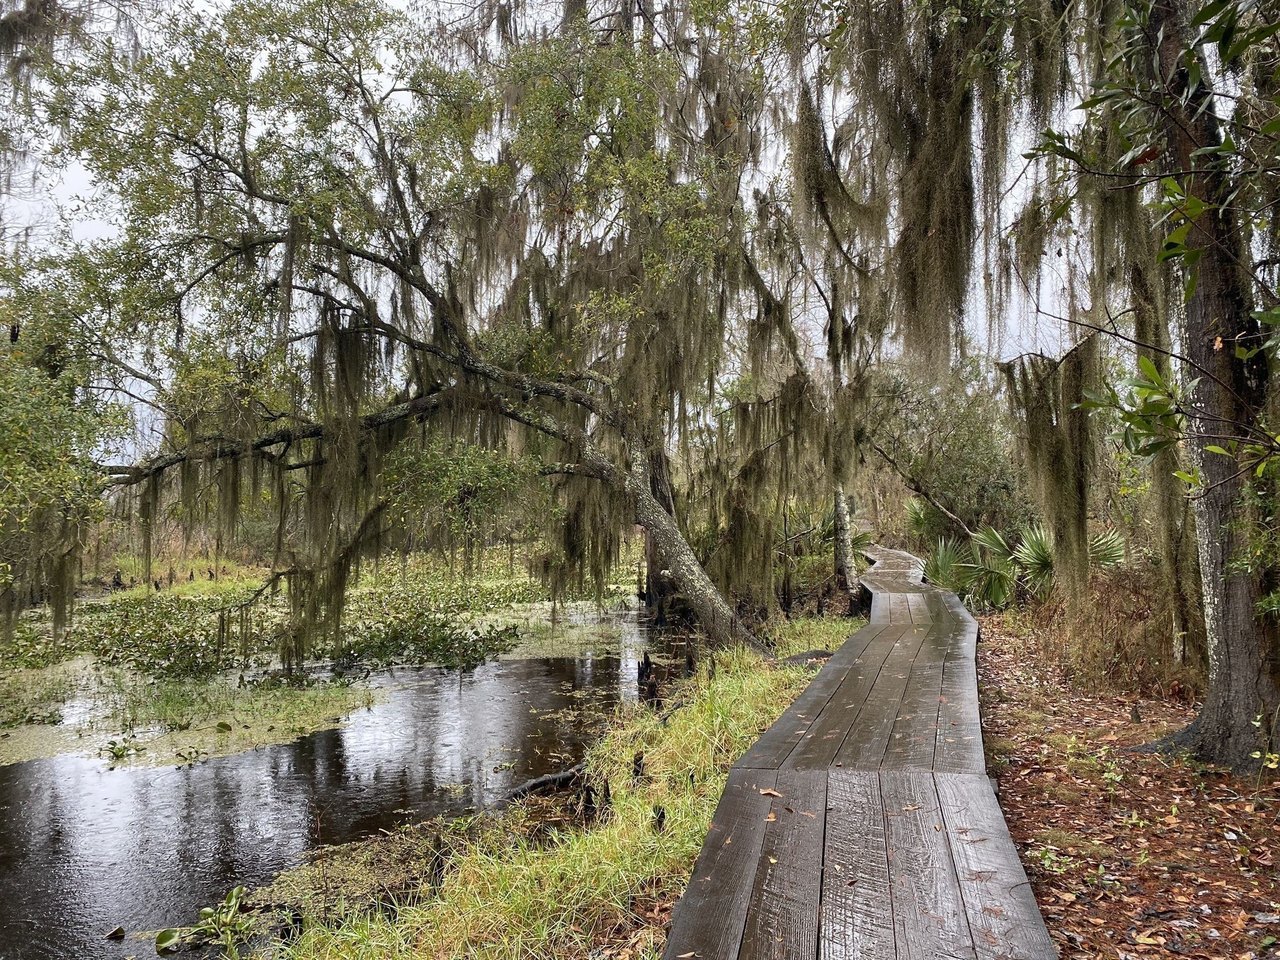 The Best Hikes In New Orleans That Are Also Short And Sweet